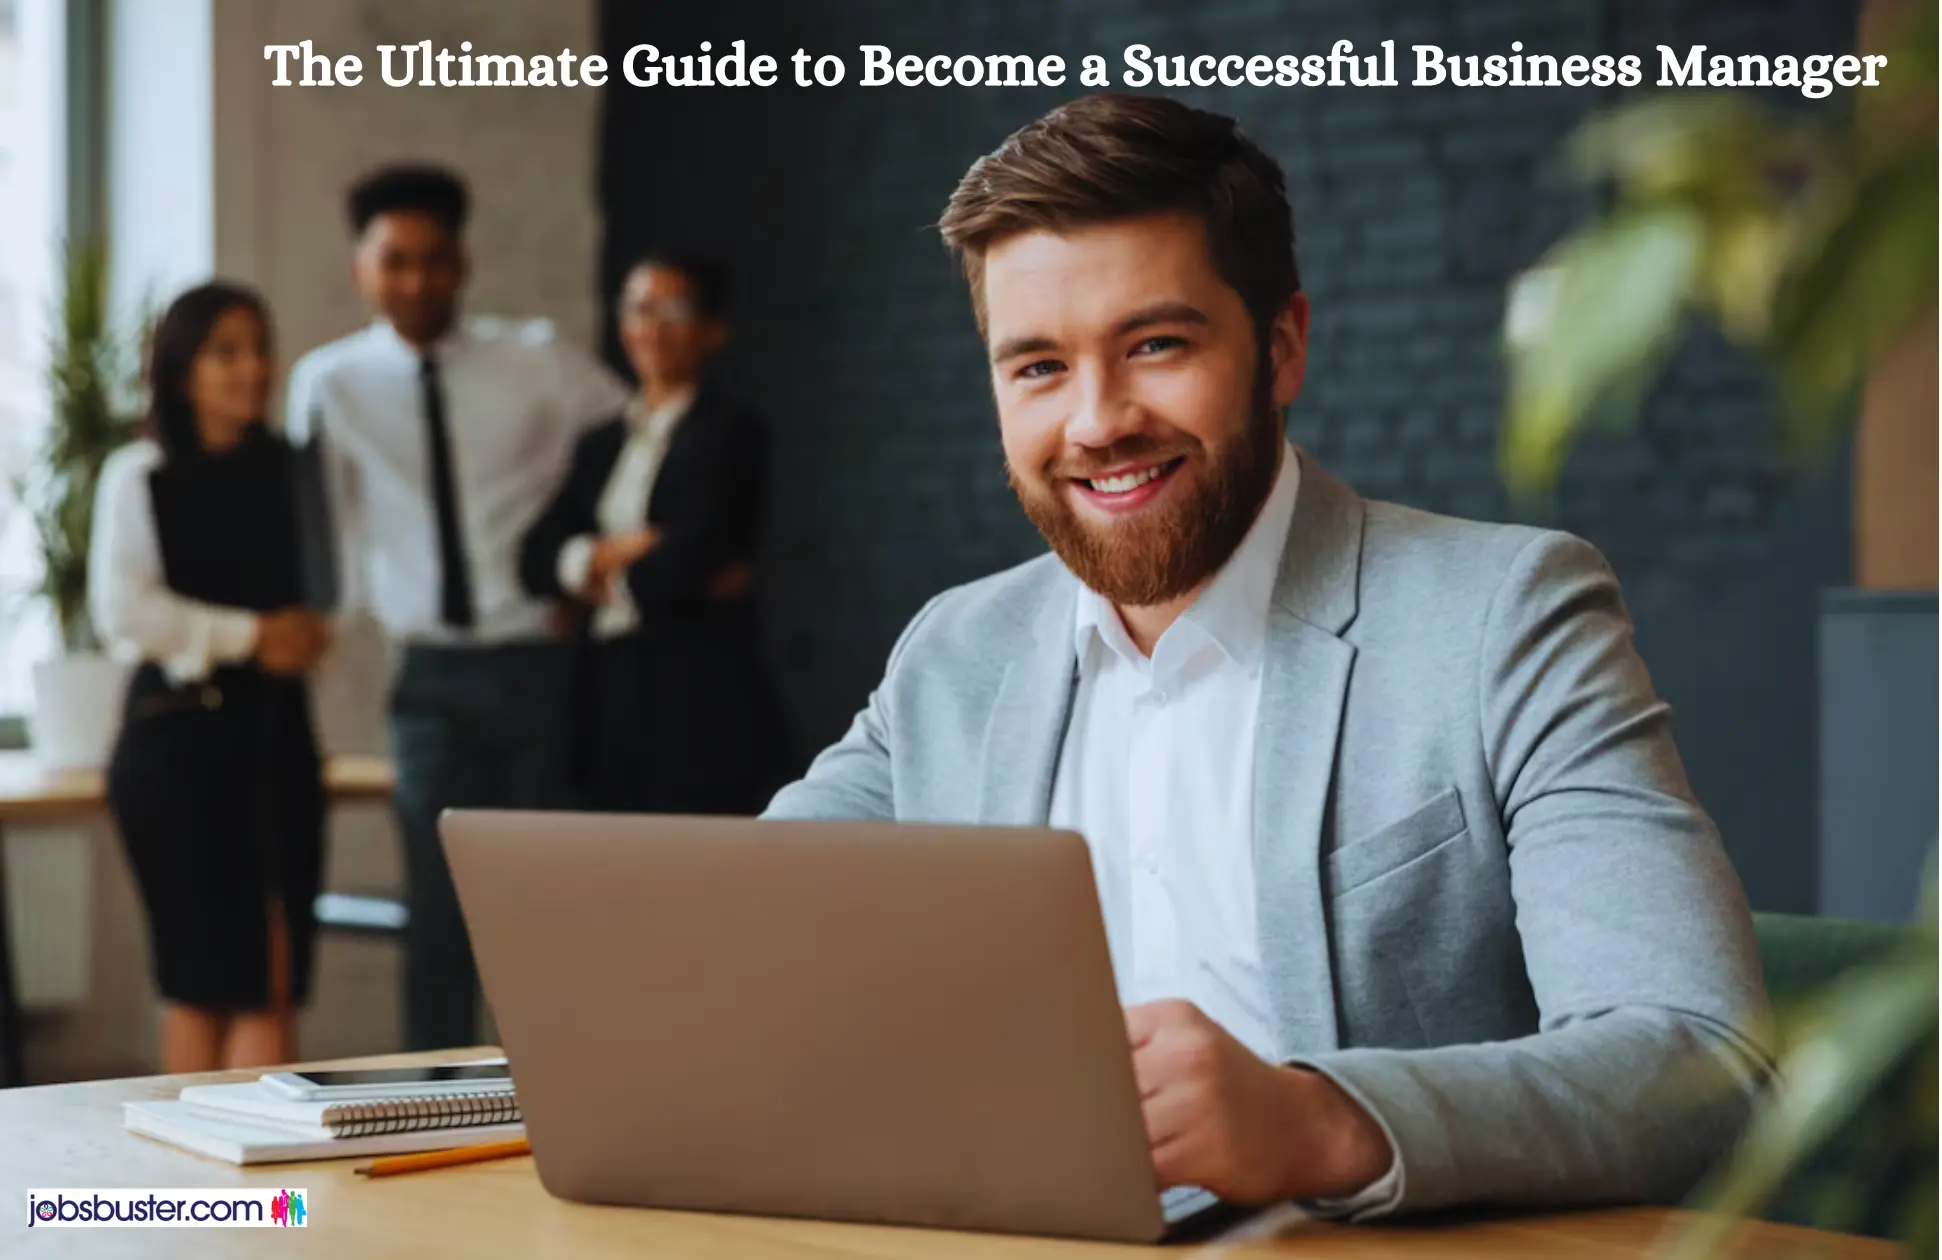 The Ultimate Guide to Become a Successful Business Manager